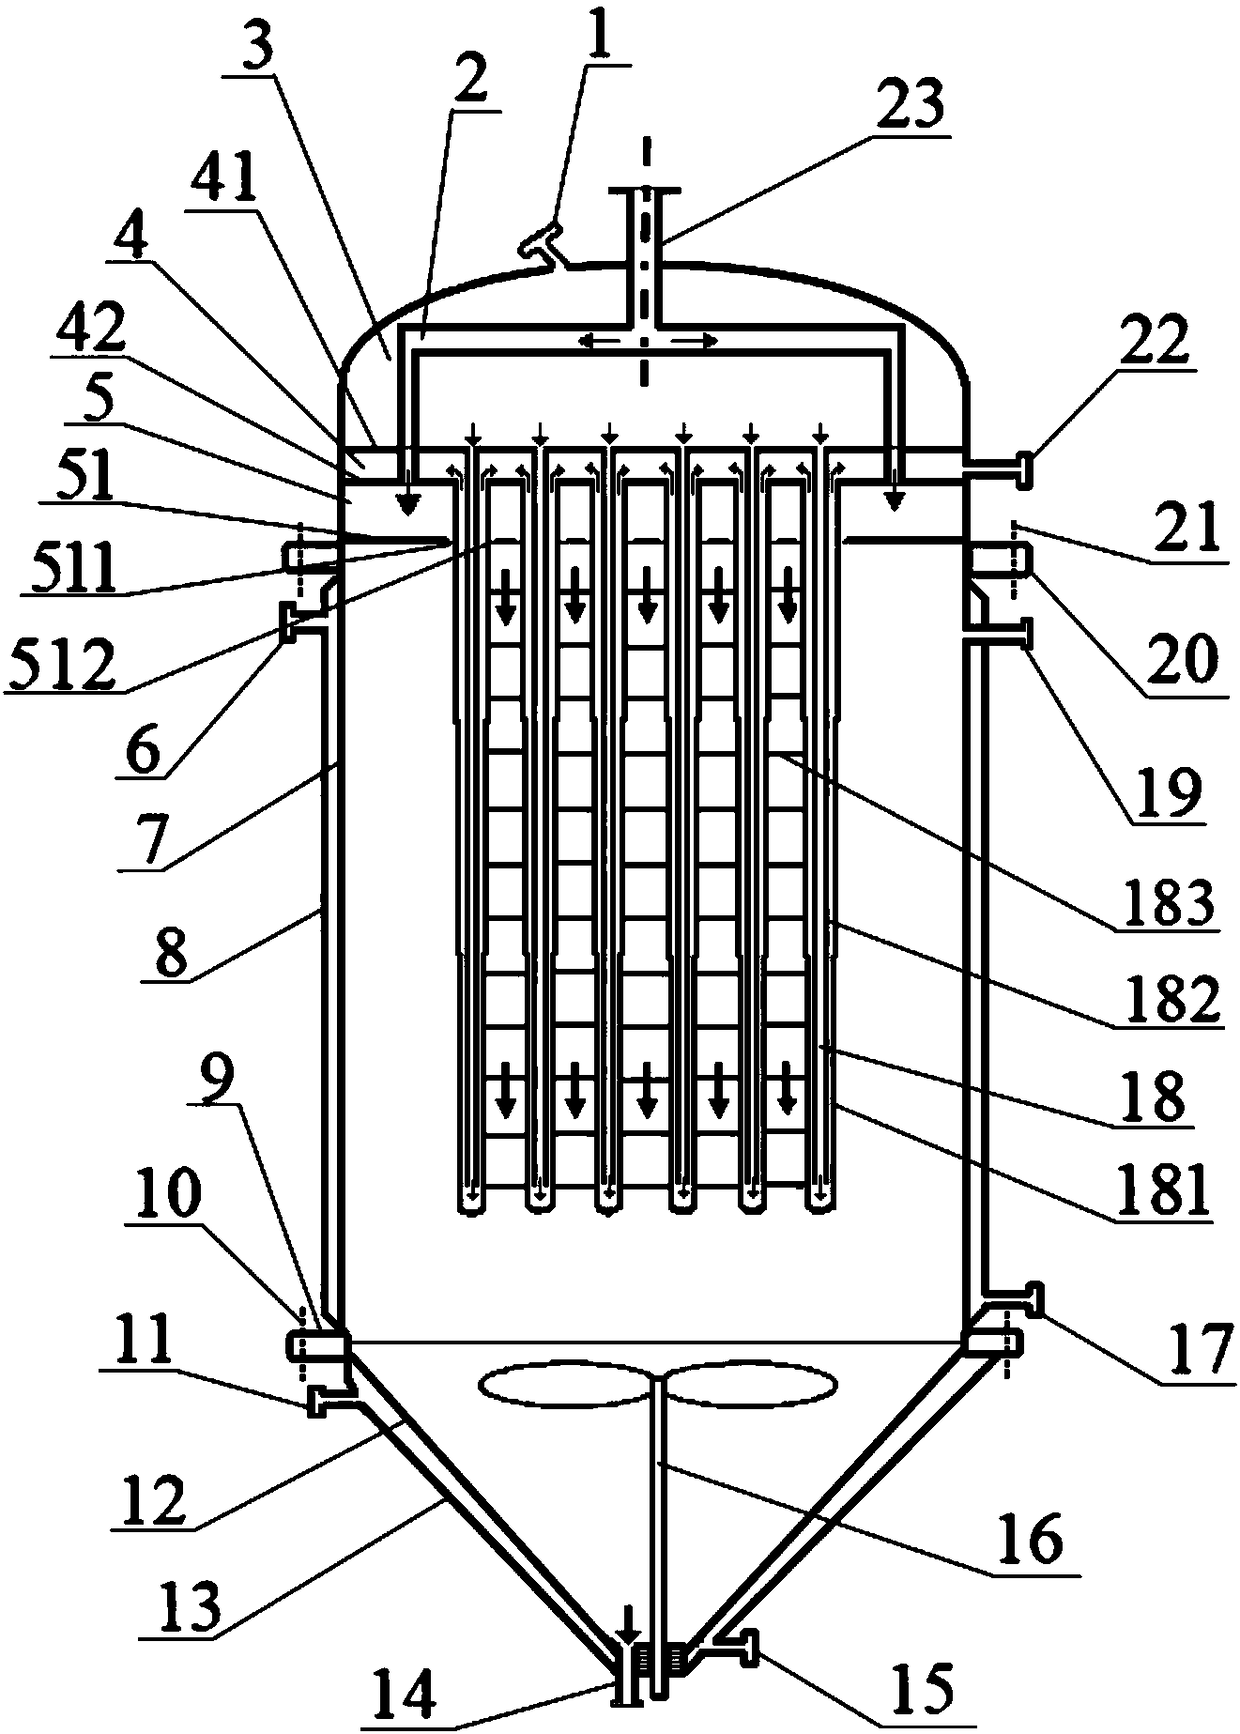 A method of falling film melt polycondensation reaction between rows of tubes for preparing high-viscosity melt and its reactor